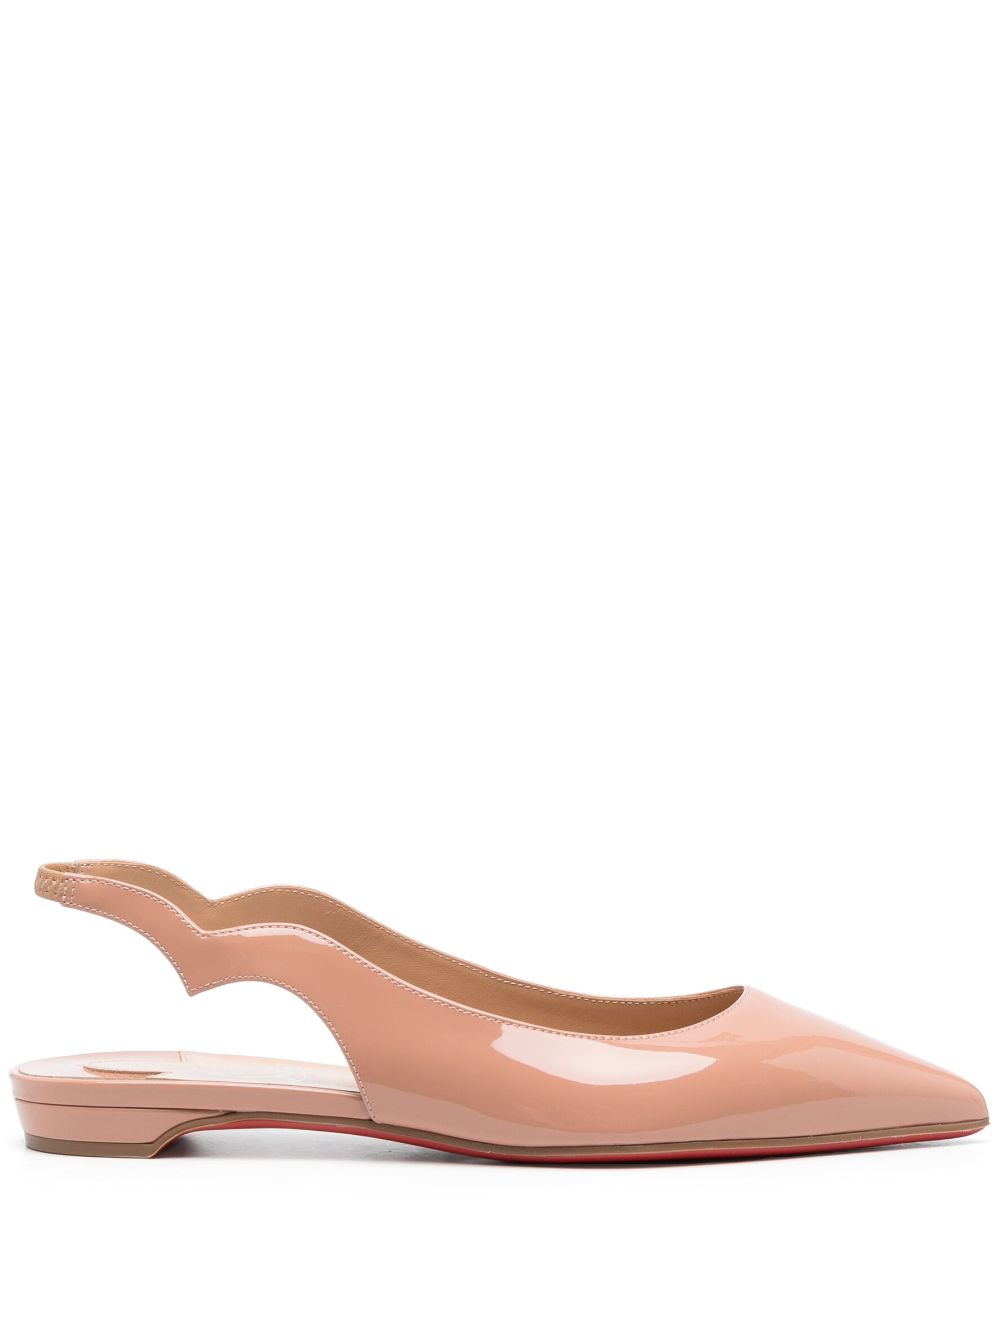 Christian Louboutin Powder Pink Leather Ballerina Flats For Women In Neutral